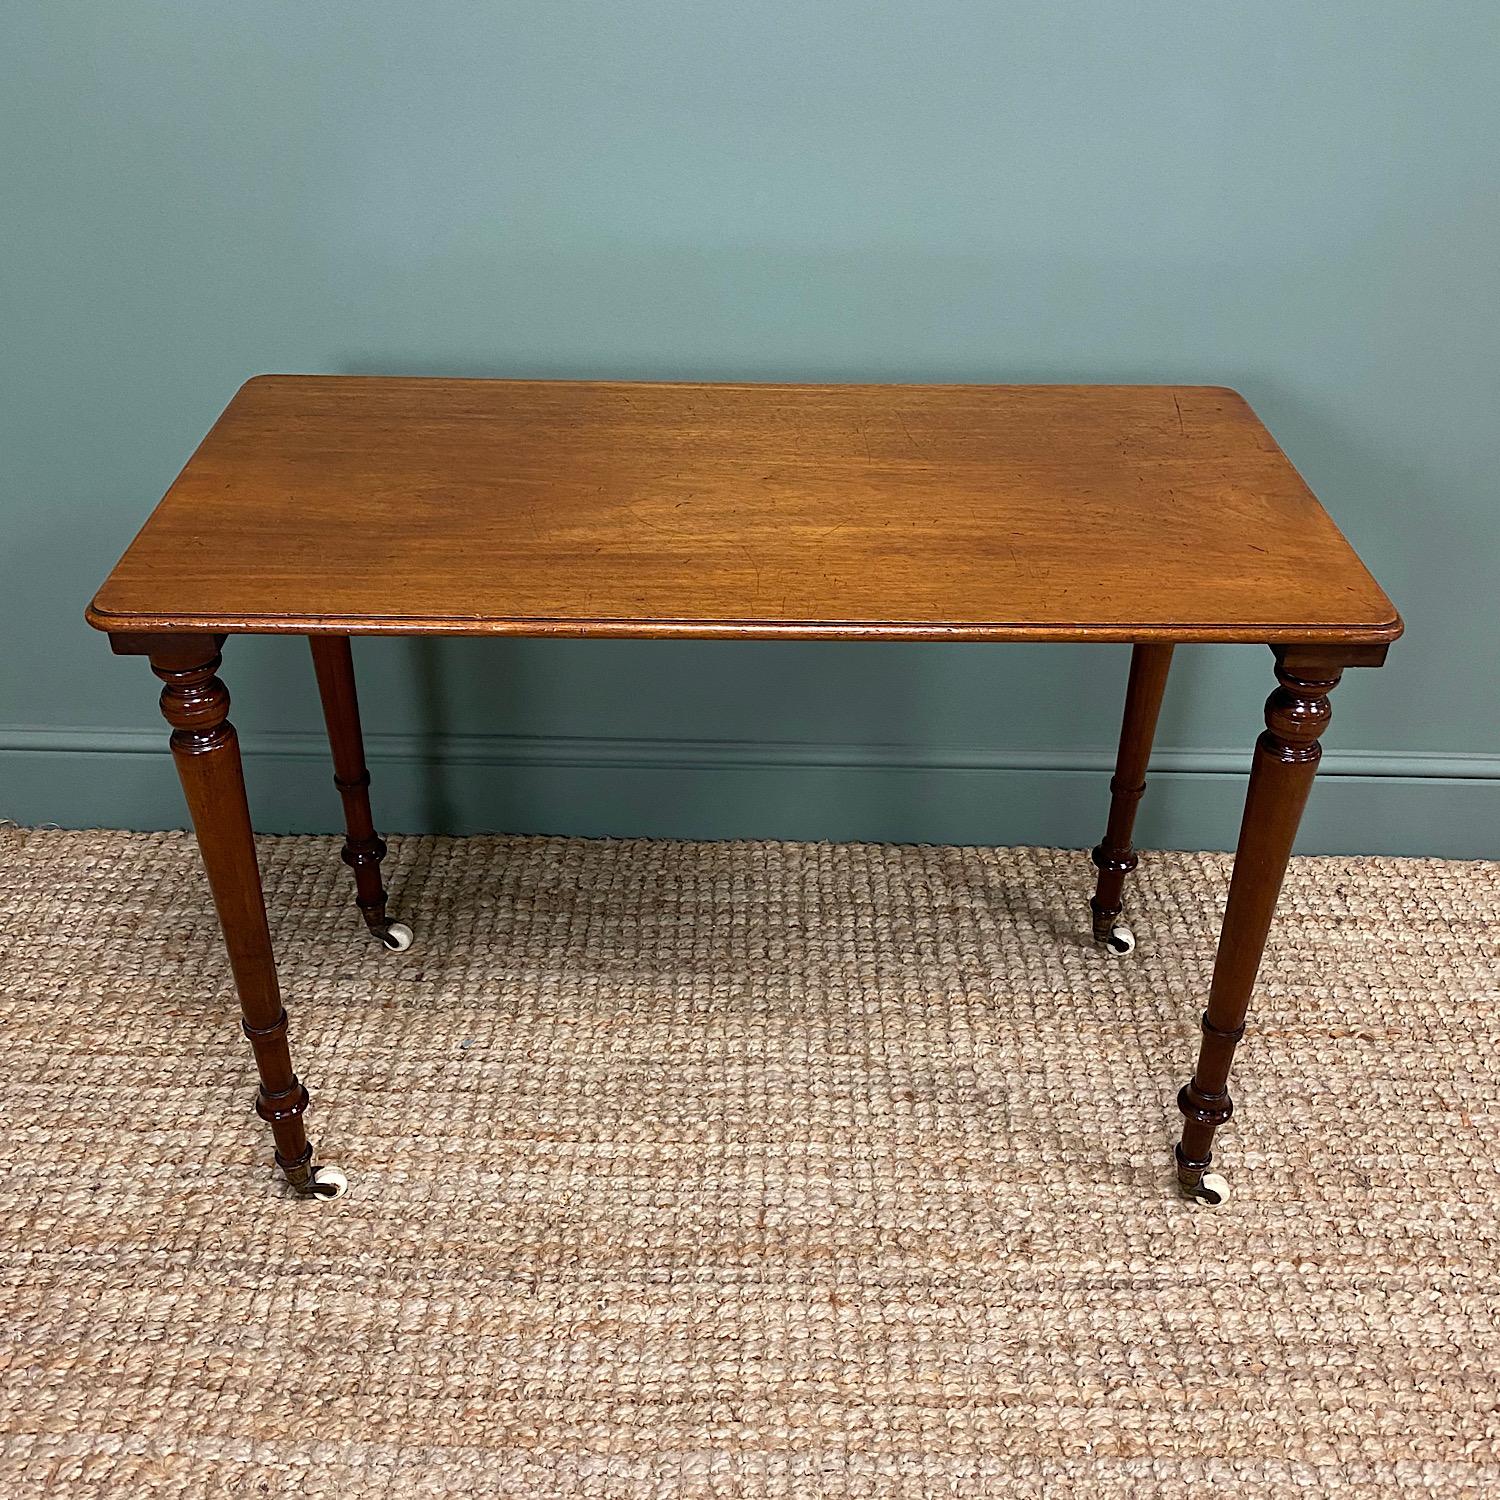 Elegant Victorian Mahogany Antique Side Stretcher Table

This Fine Quality 19th Century Victorian Mahogany Antique Stretcher Table Side Table / Lamp Table / Sofa Table dates from ca. 1870 has a beautifully figured top above four elegantly turned